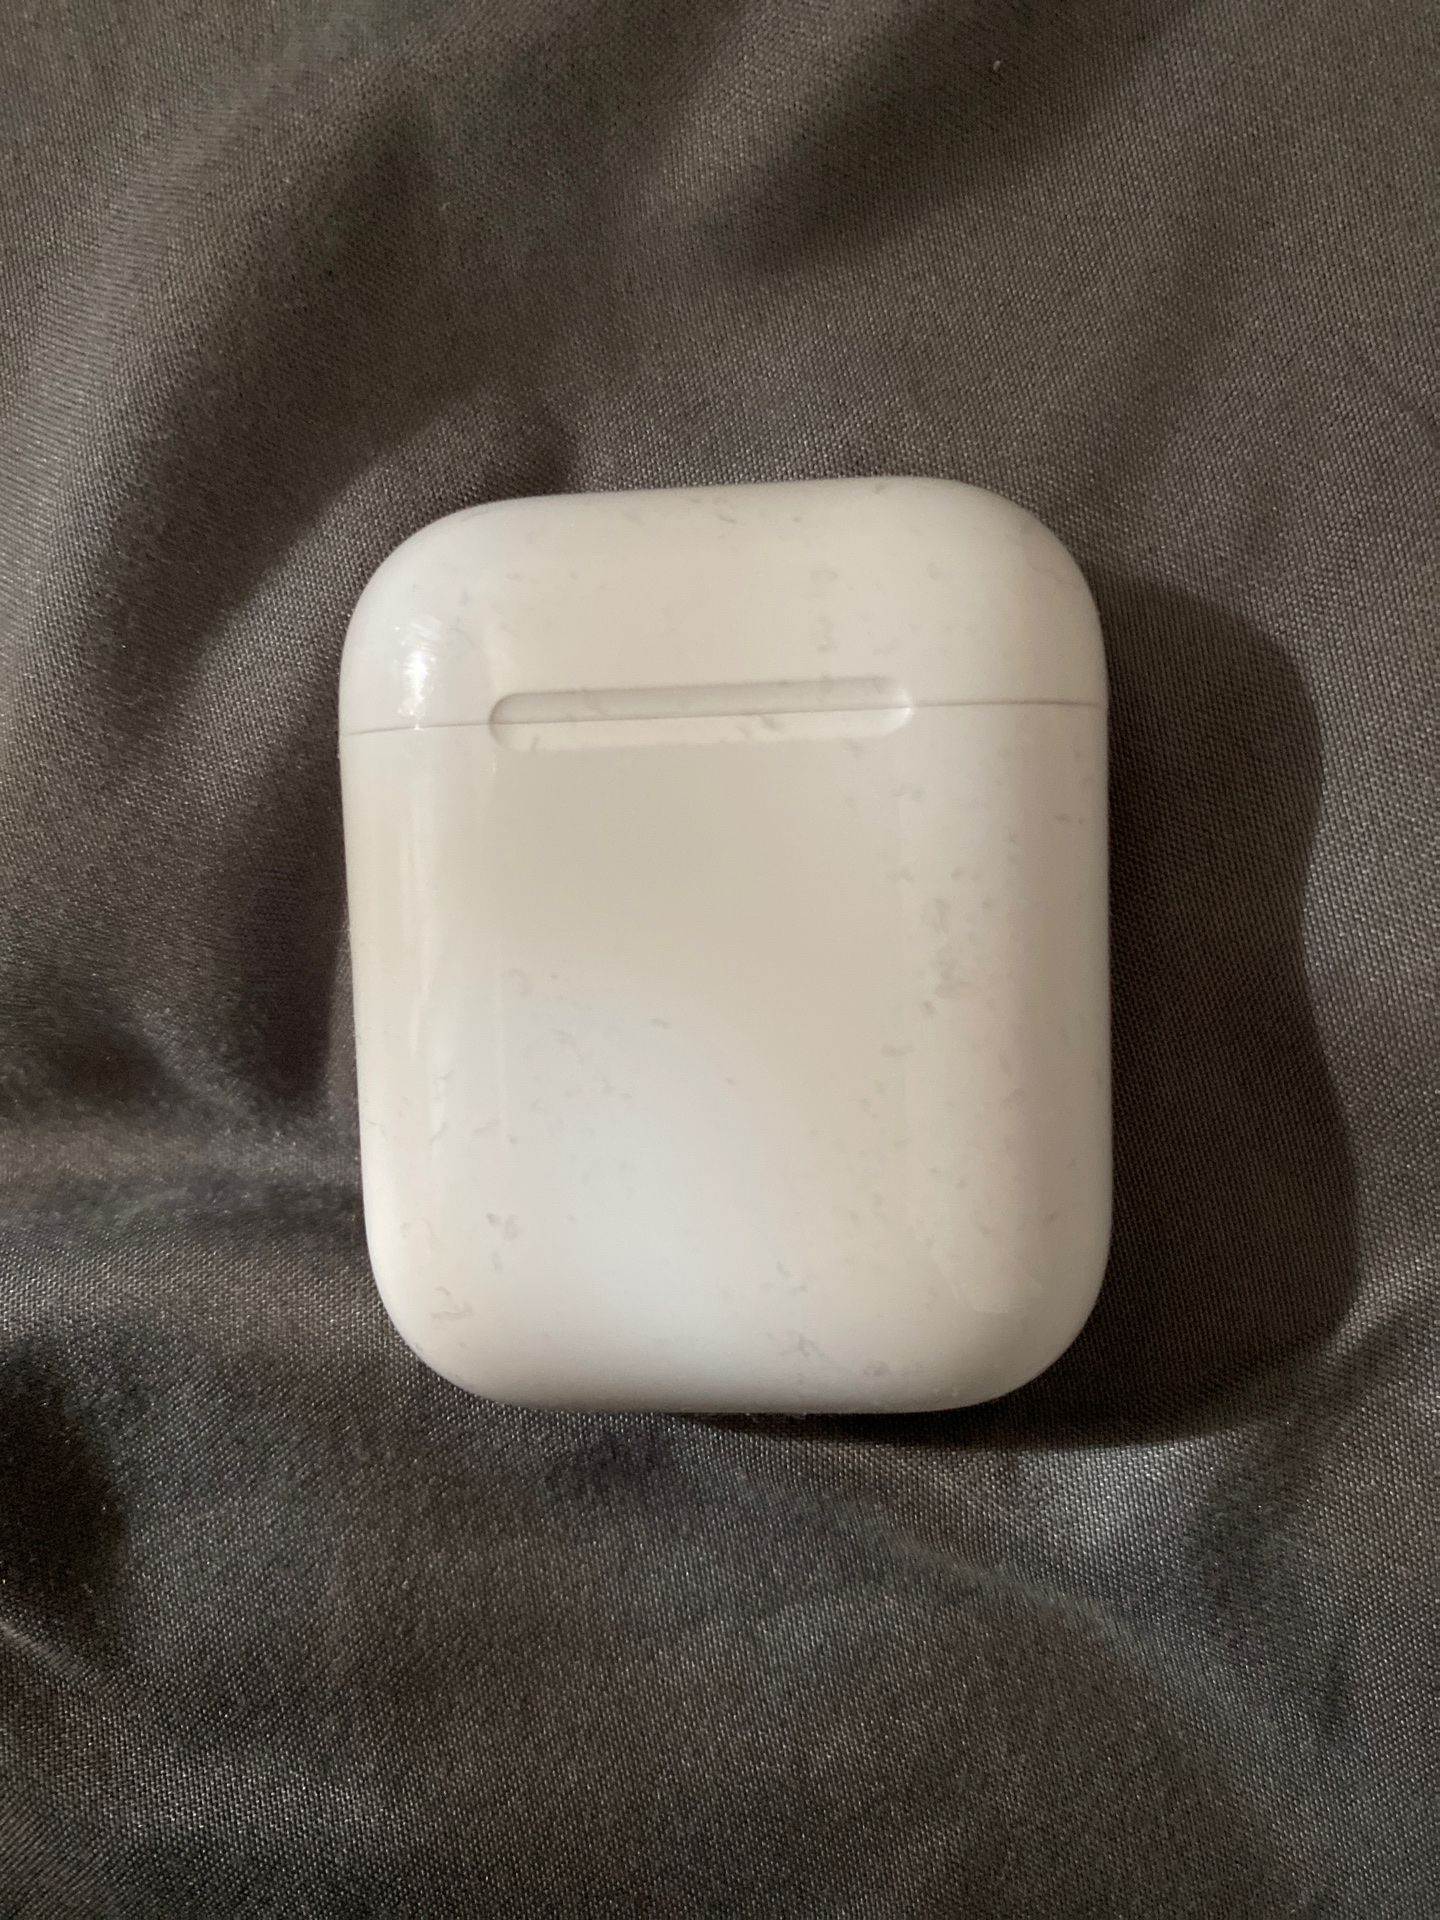 Apple AirPods good condition